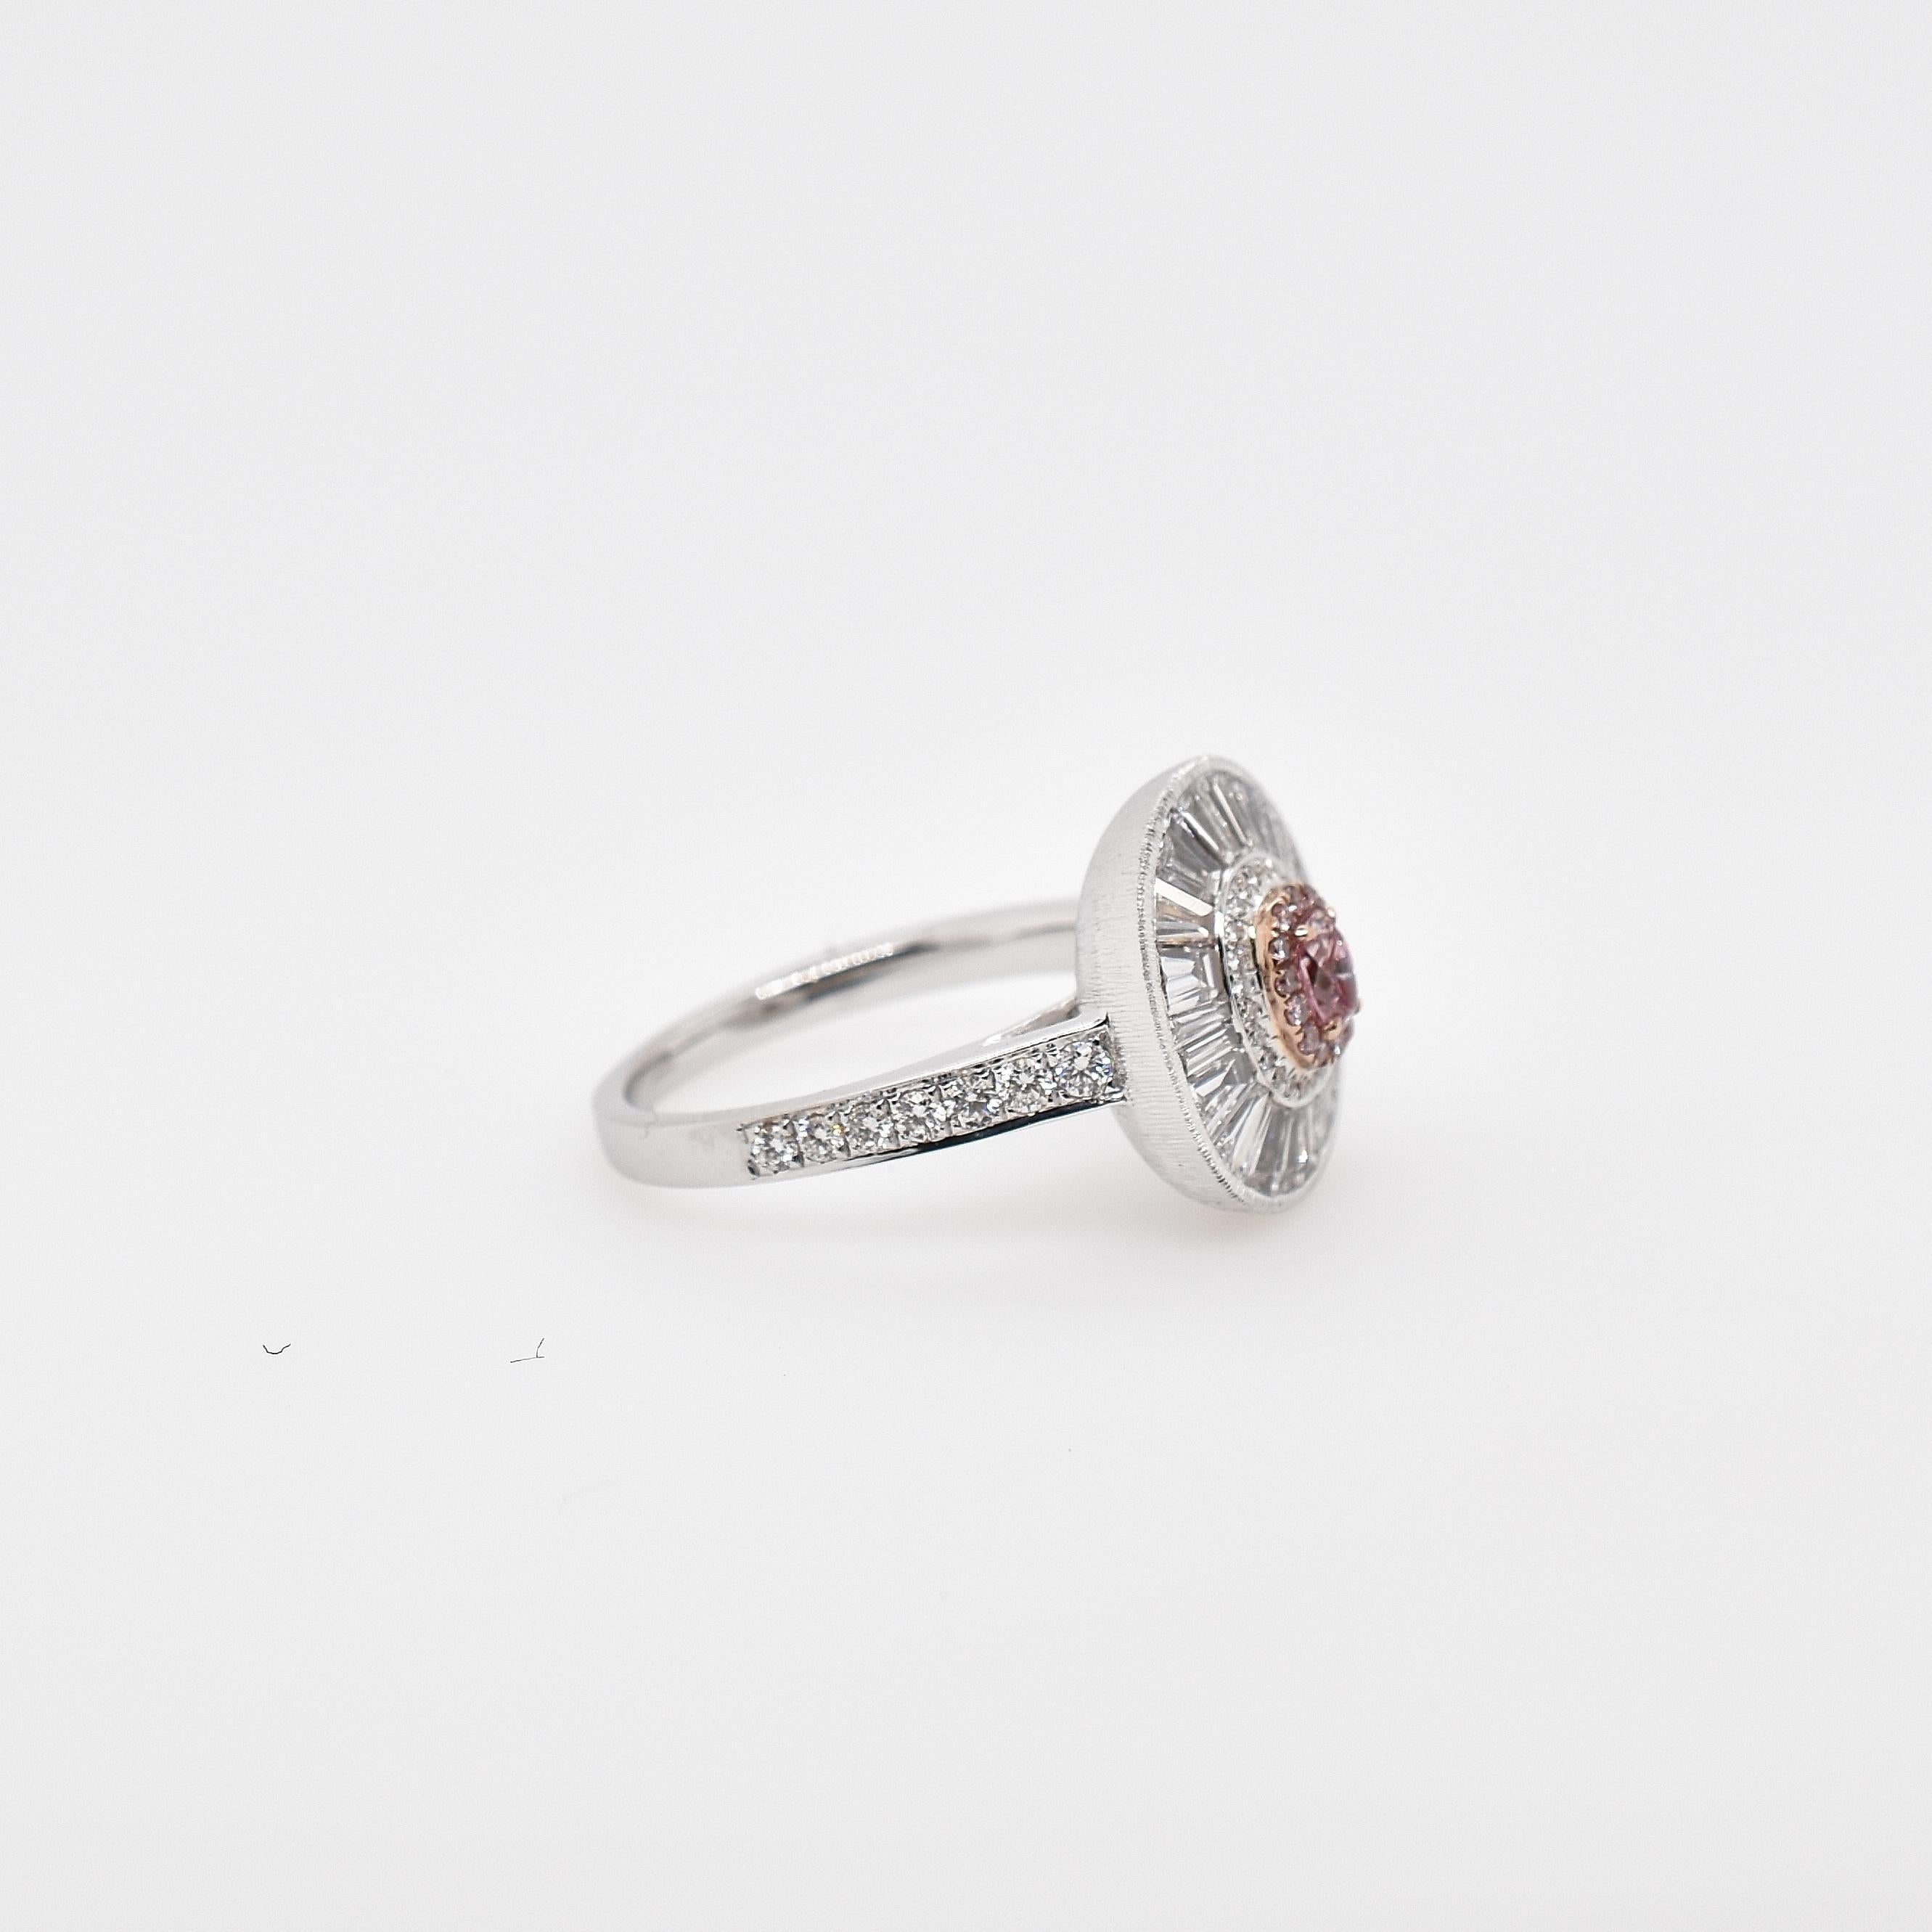 18ct white and rose gold diamond cluster ring with pink oval centre, tapered baguette cluster and grain set shoulders with closed satin finish under mount and grain set diamond shoulders. The centre oval pink diamond is 0.15ct surrounded by 14 round